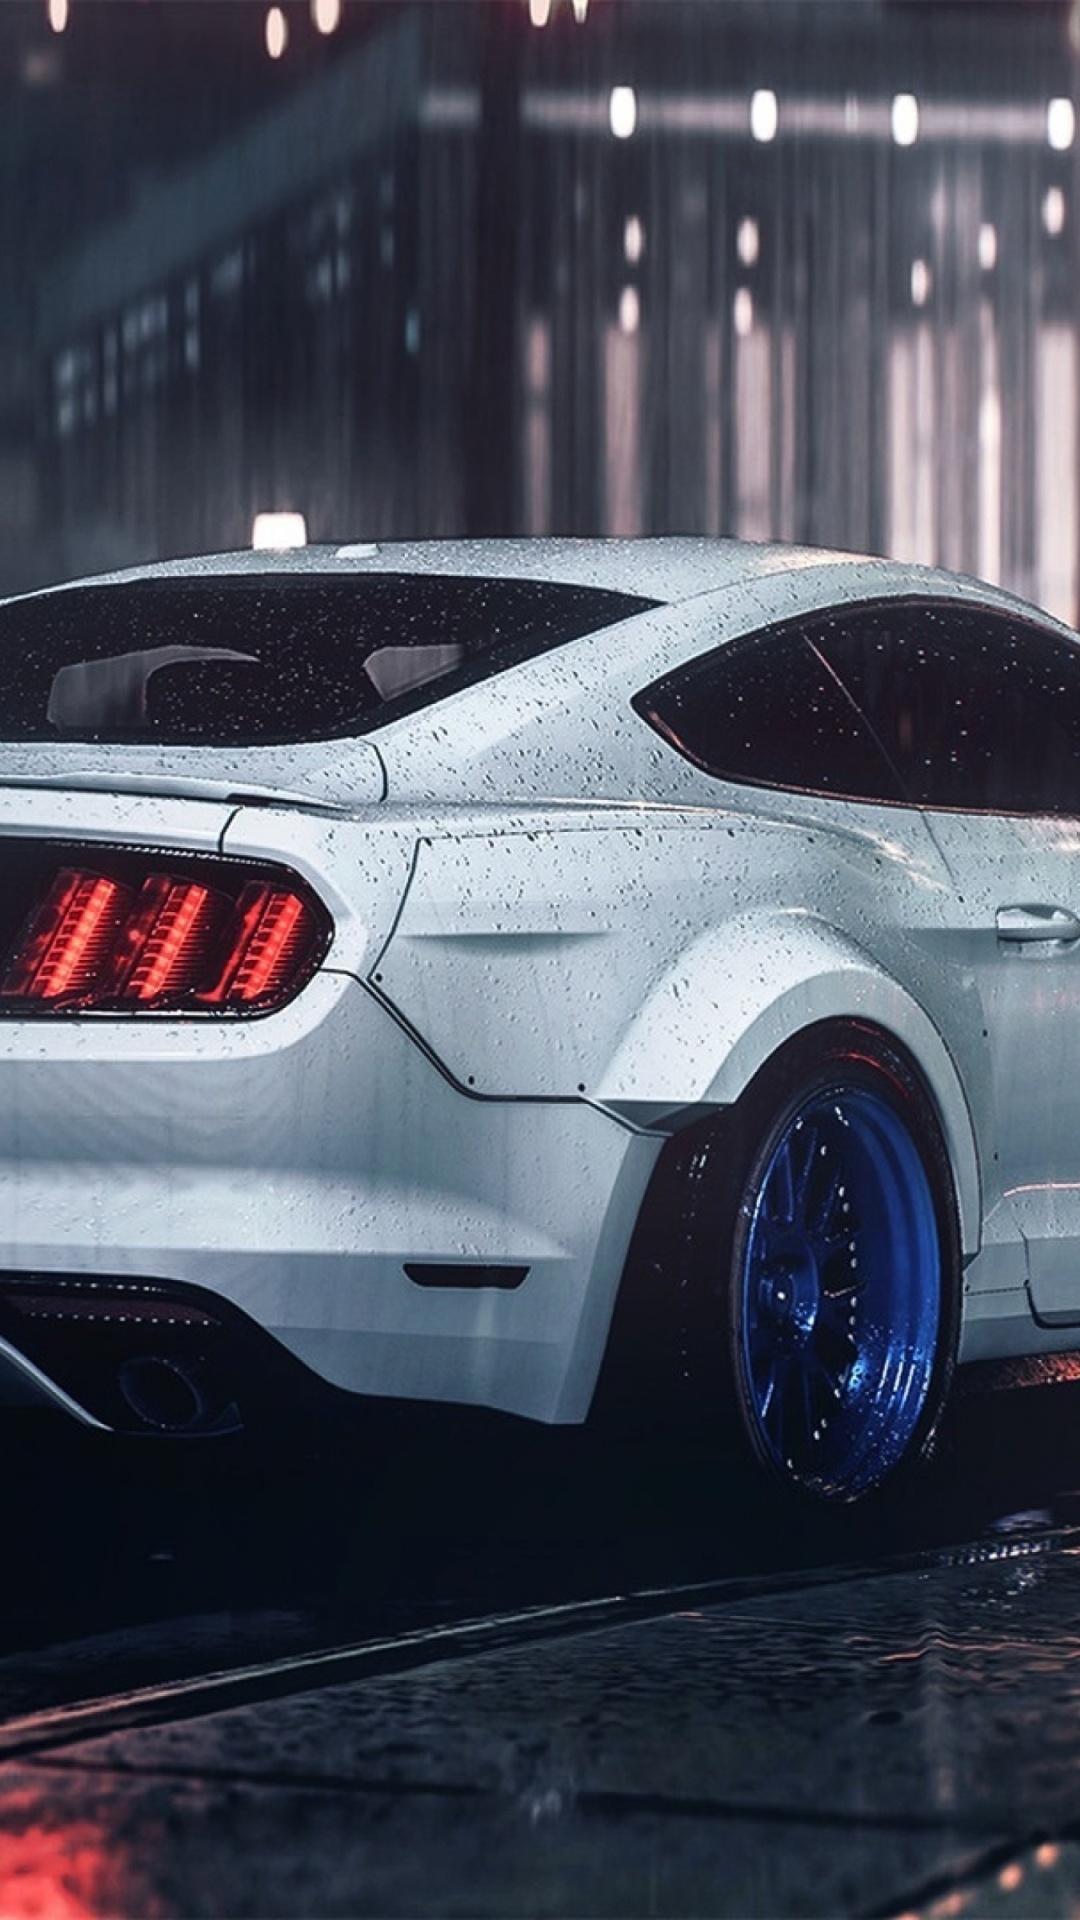 Das Ford Mustang Shelby GT350 Wallpaper 1080x1920